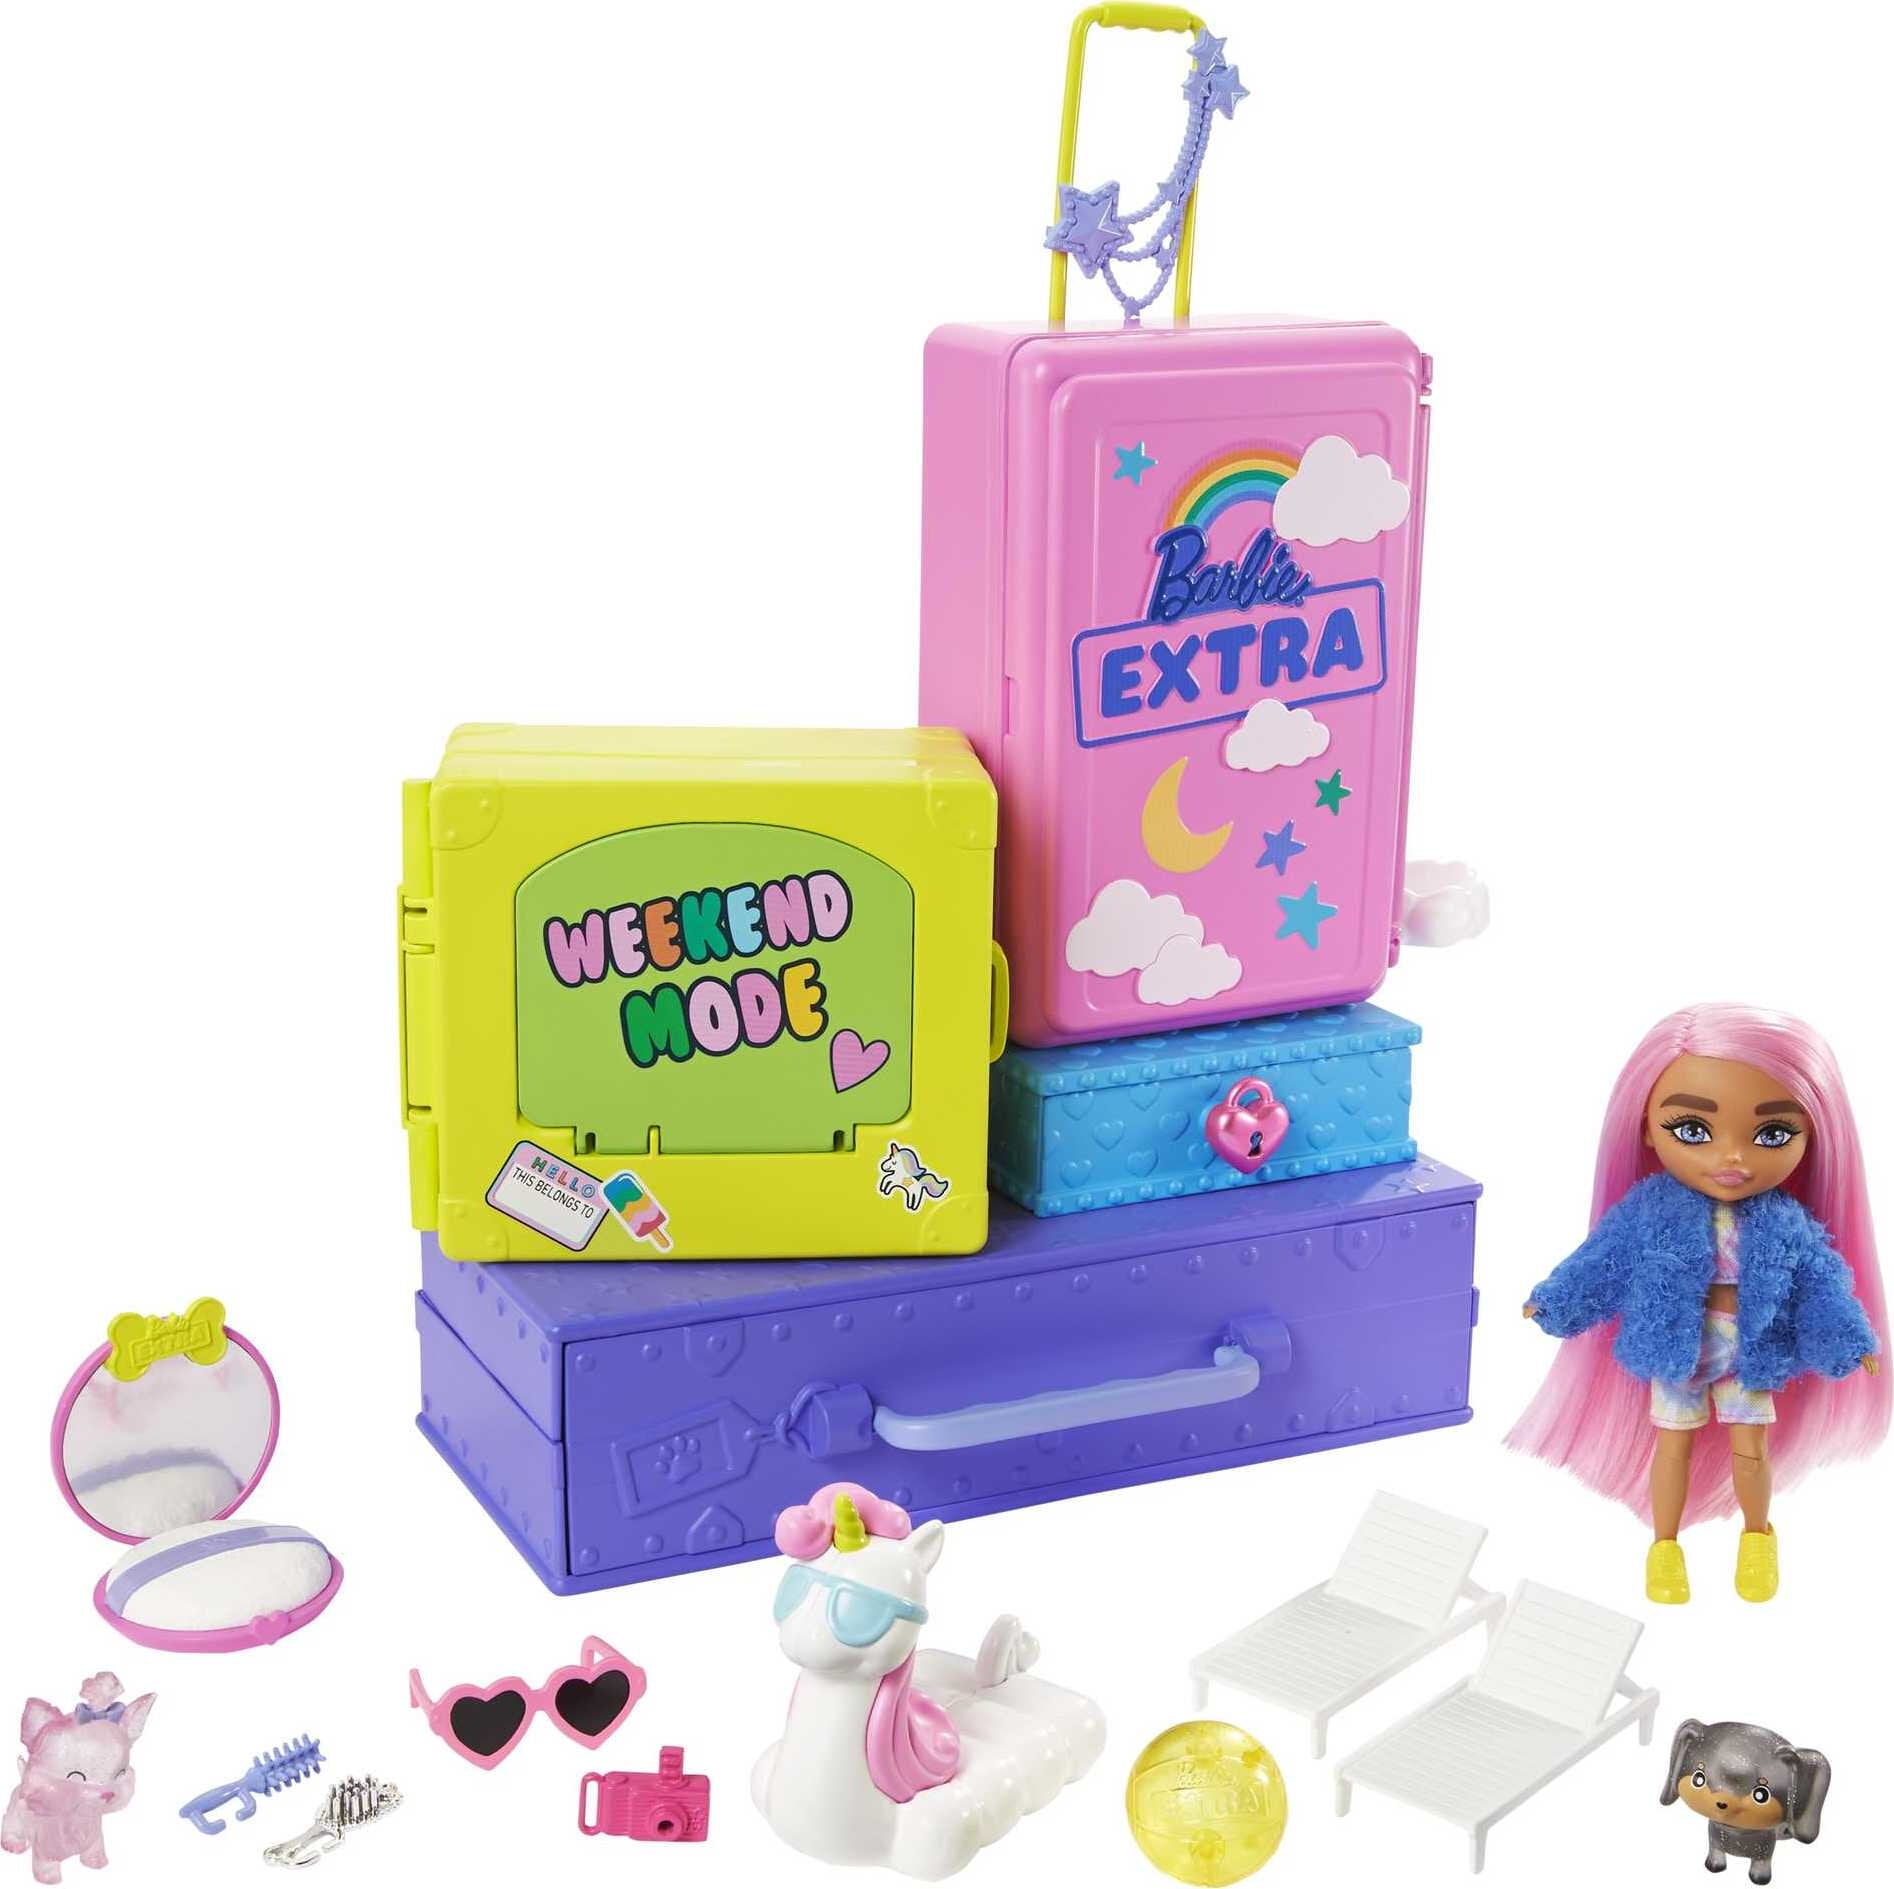 Barbie Doll Play Mobile Phones and Laptop Computer play accessory 